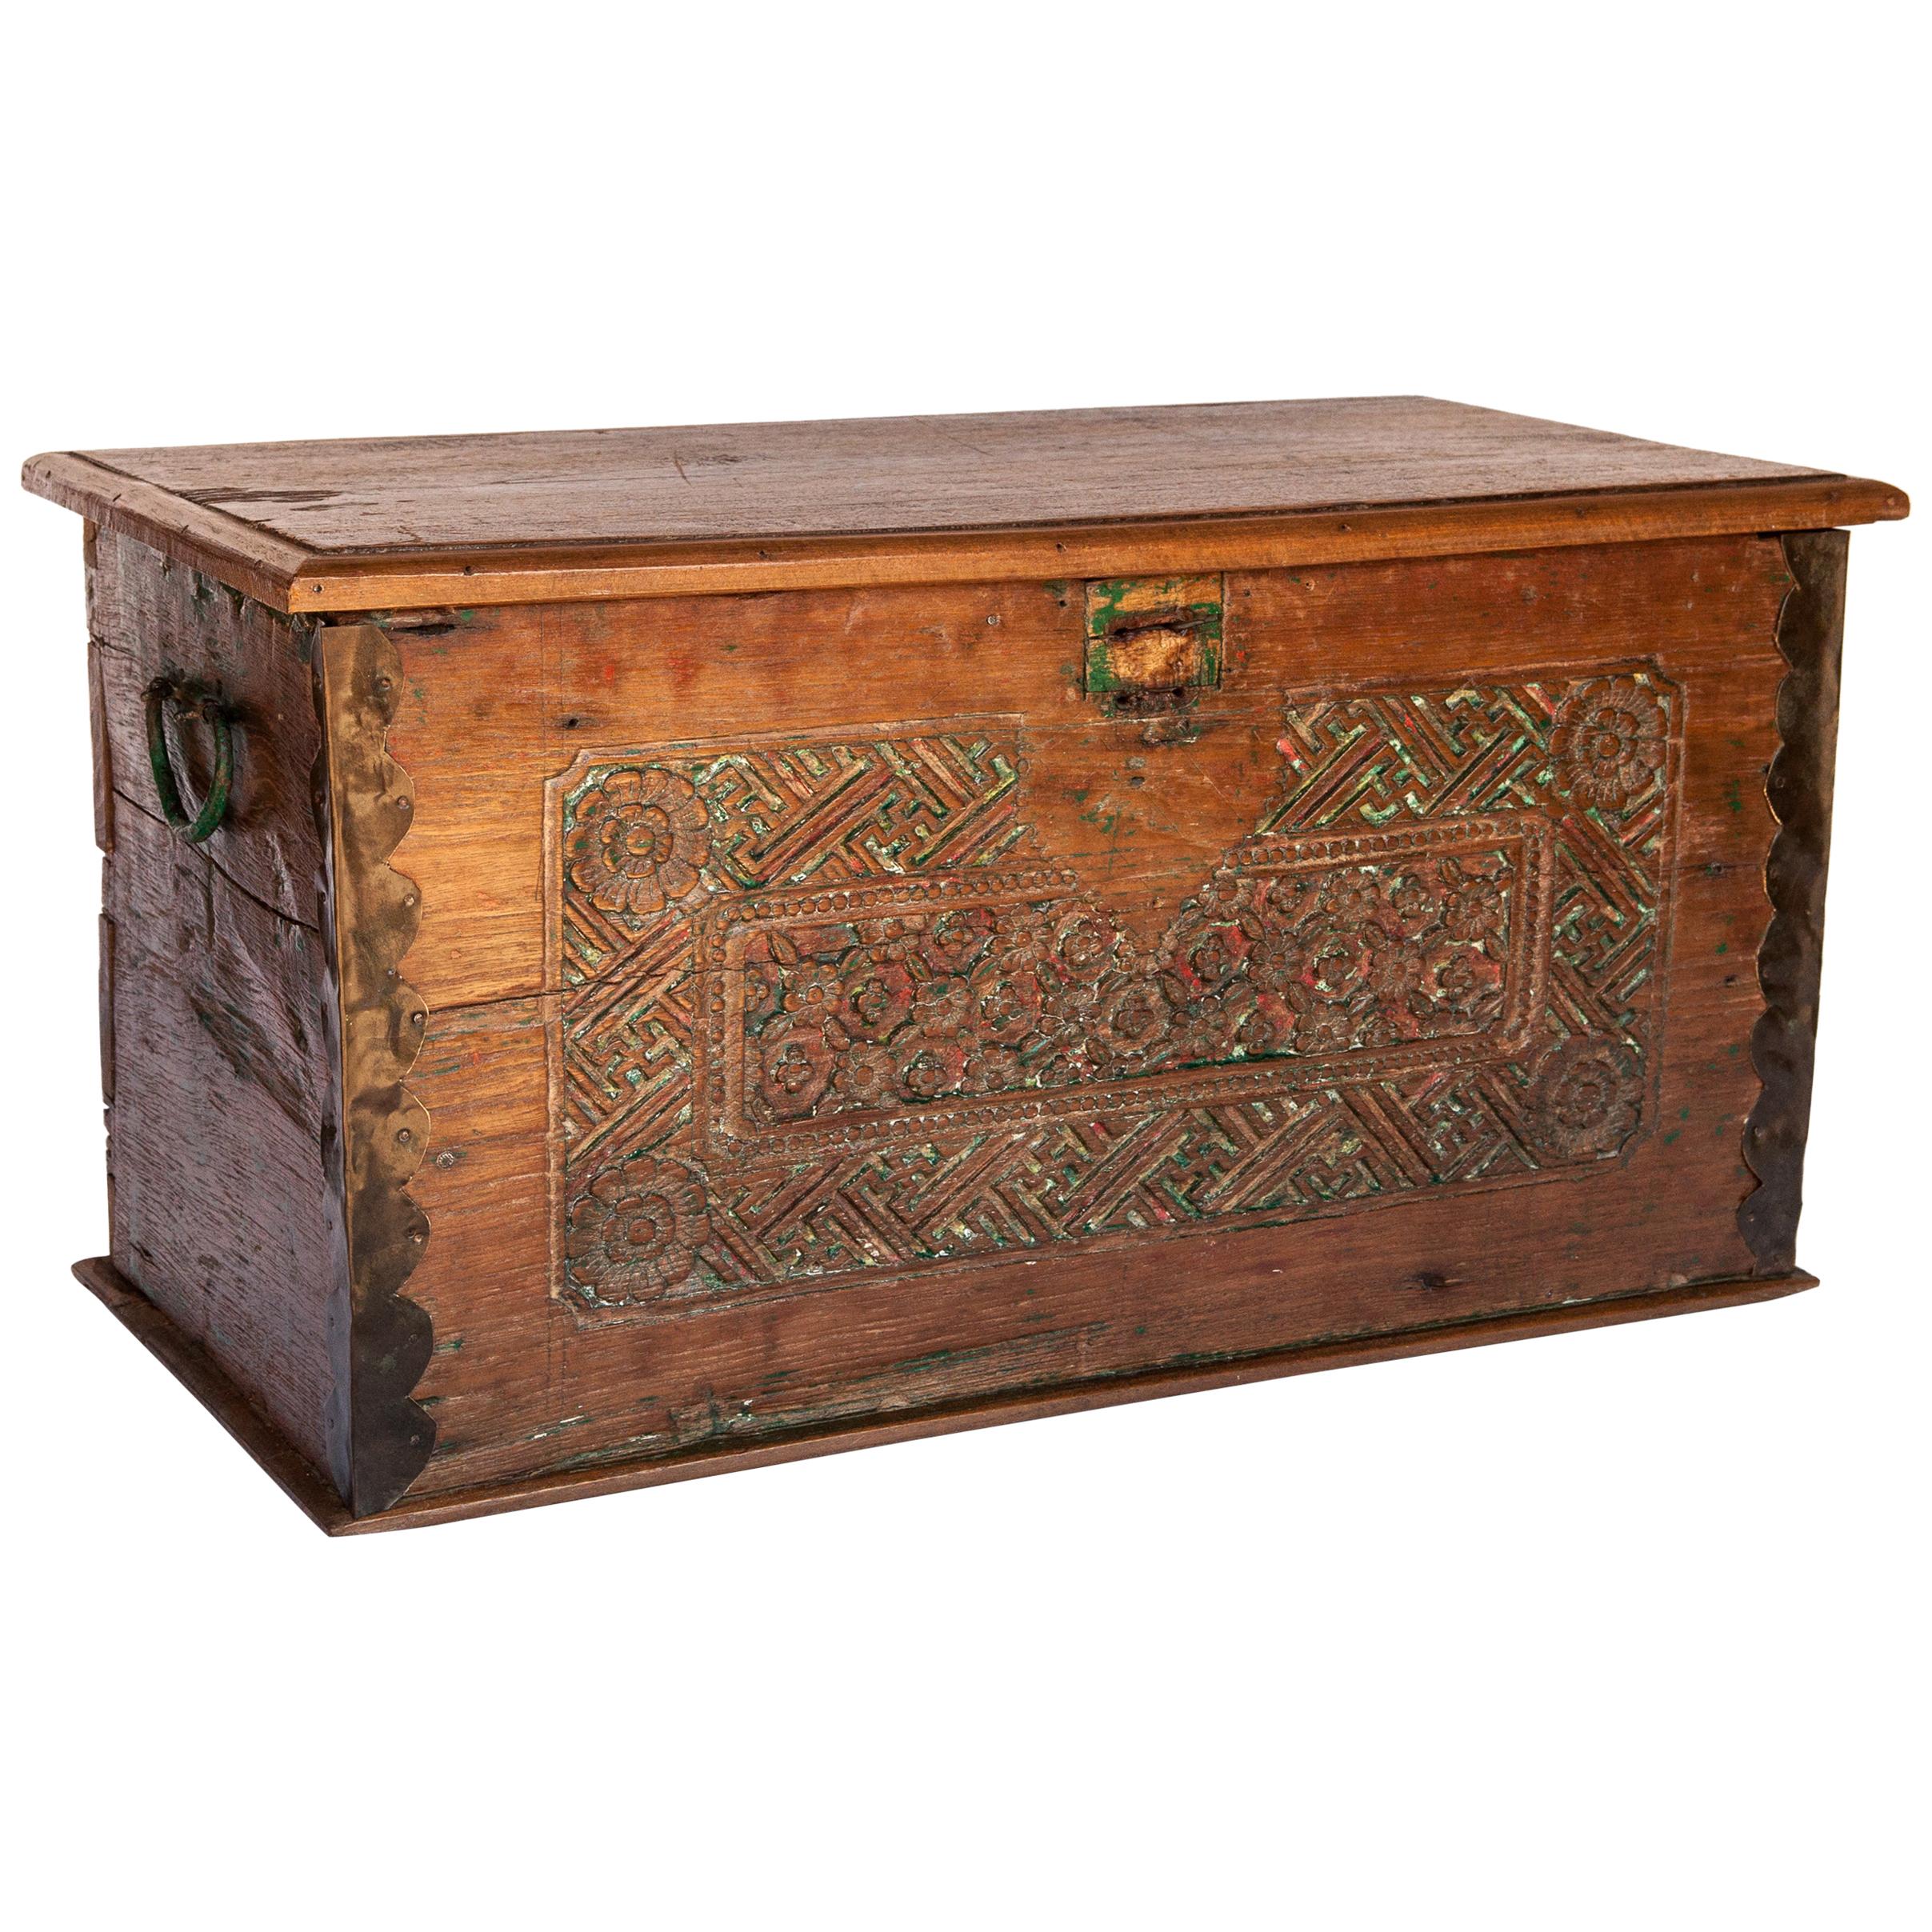 Vintage Teak Storage Chest with Carved Design from Java, Mid-20th Century